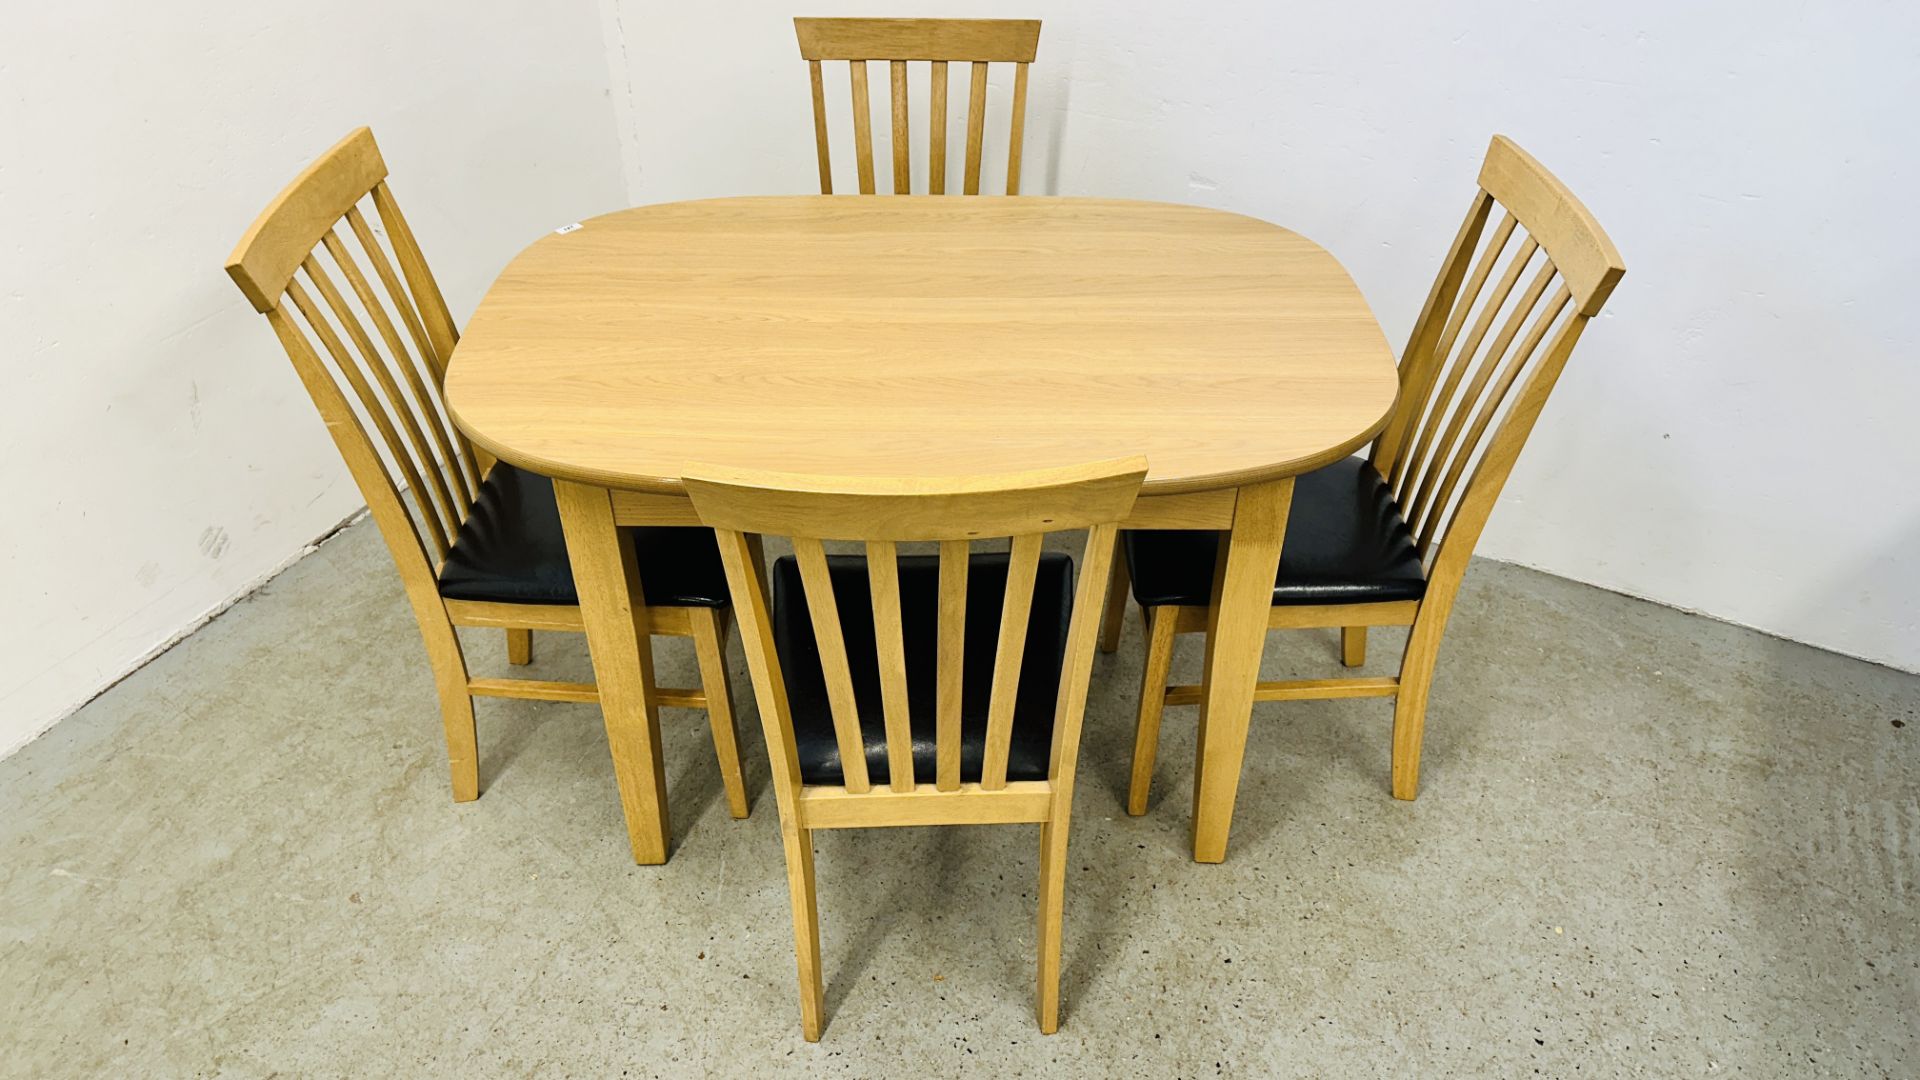 MODERN BEECHWOOD FINISH DINING TABLE AND SET OF 4 MATCHING CHAIRS WITH FAUX LEATHER SEATS. - Image 2 of 12